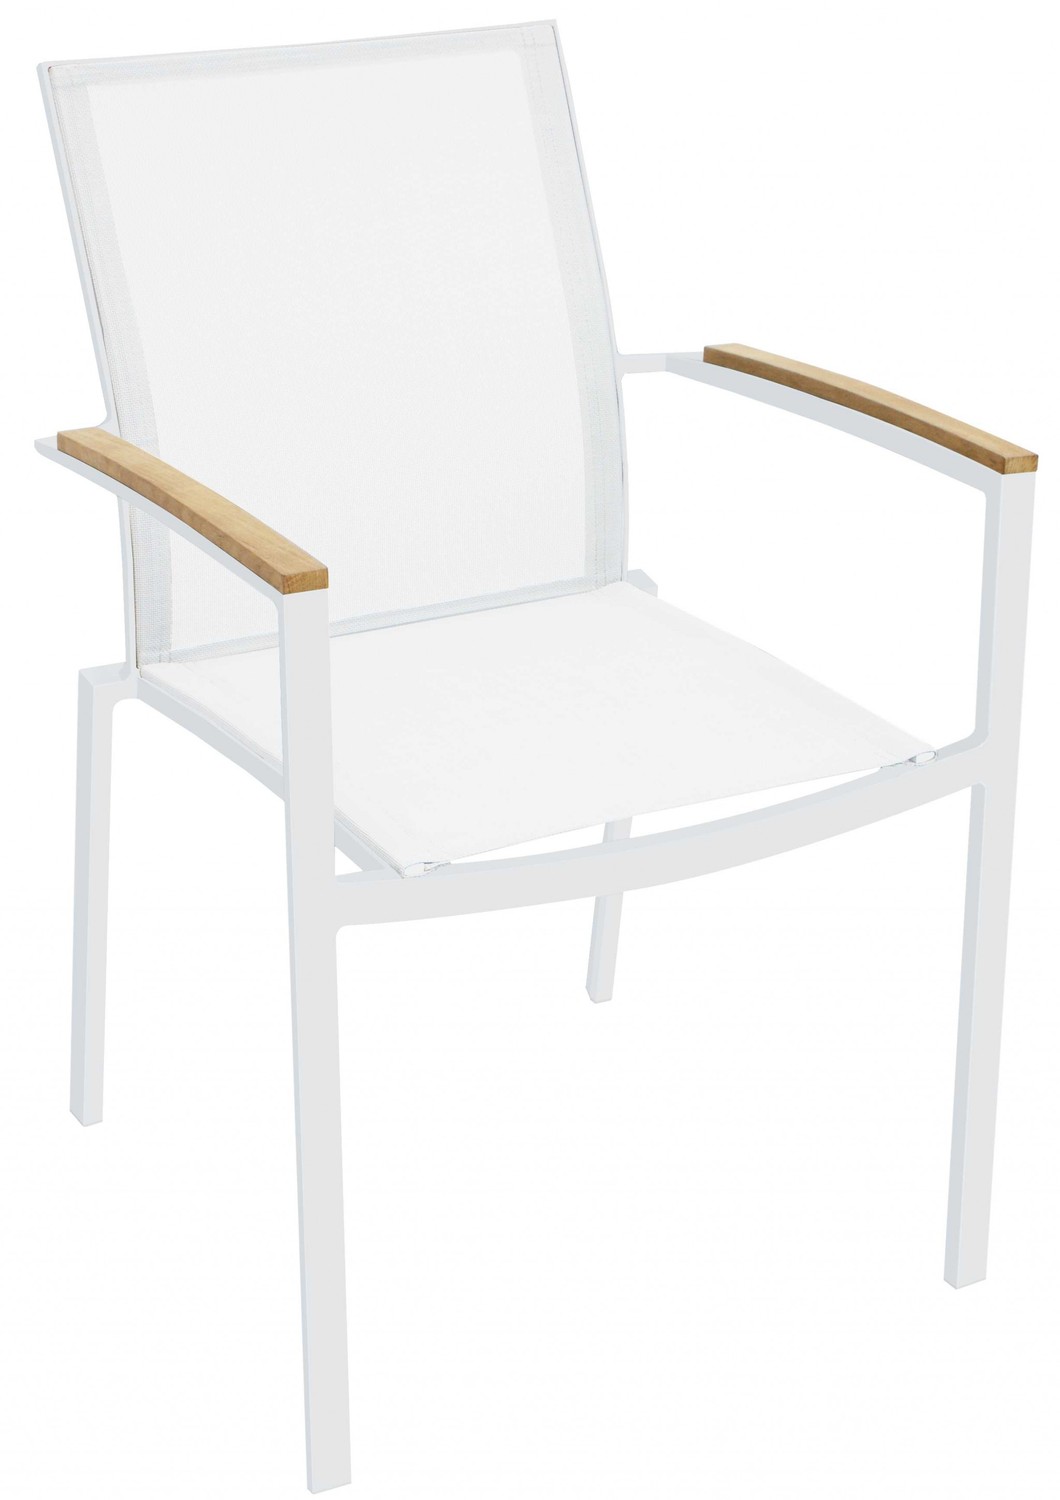 22" X 23" X 34" White Wood Dining Armed Chair